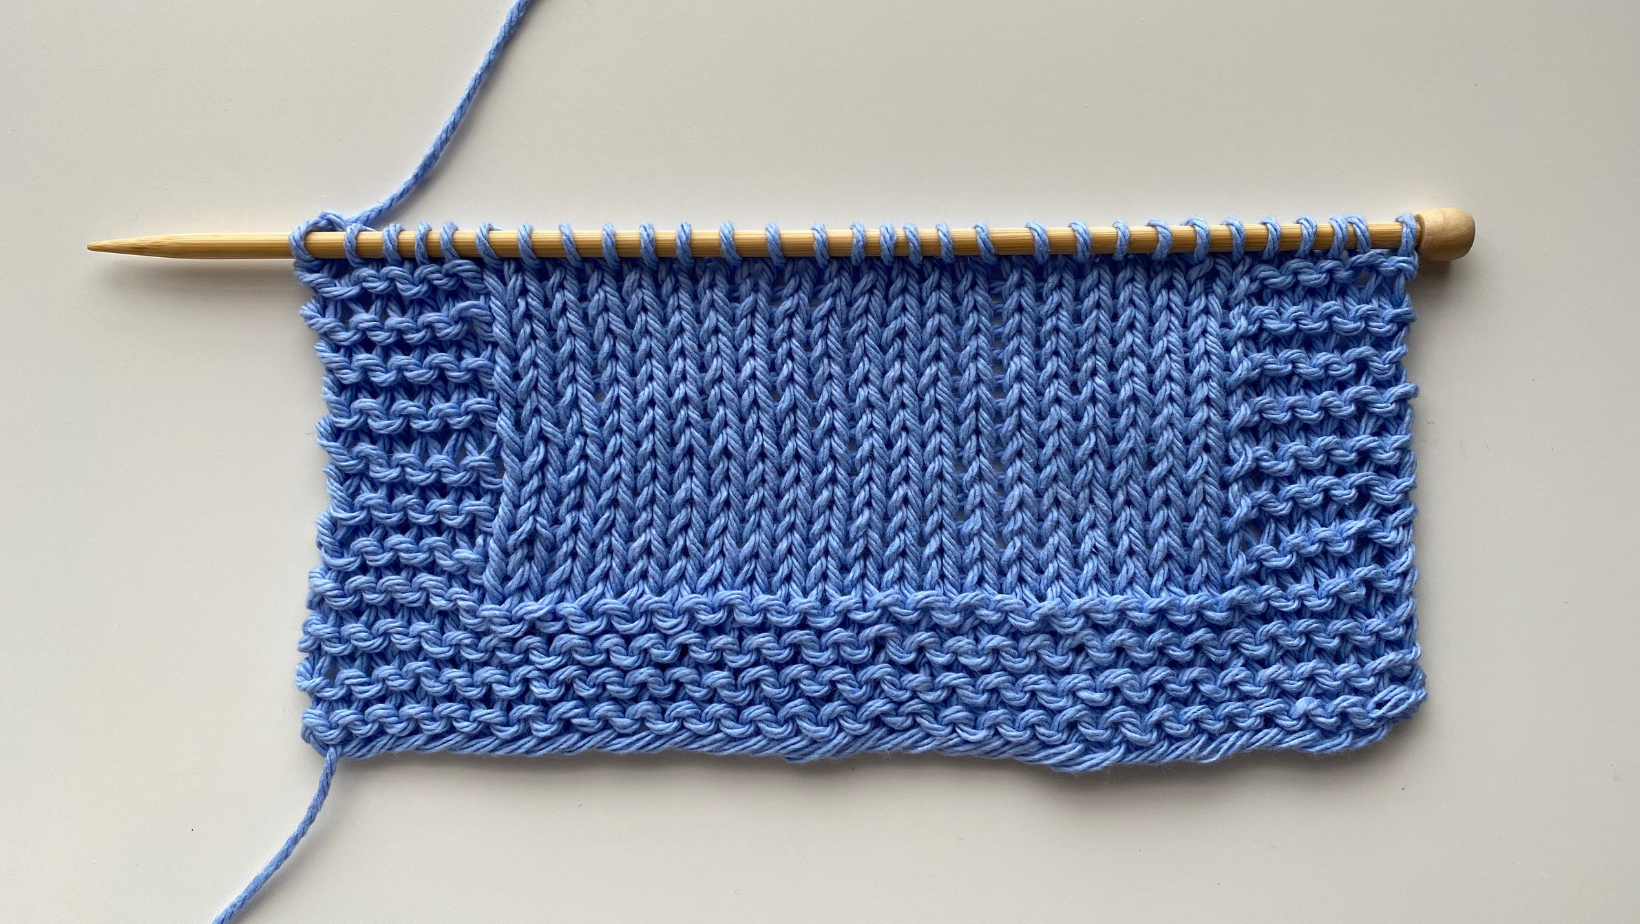 A cropped image of a partially knitted project and a knitting needle wrapped in blue thread